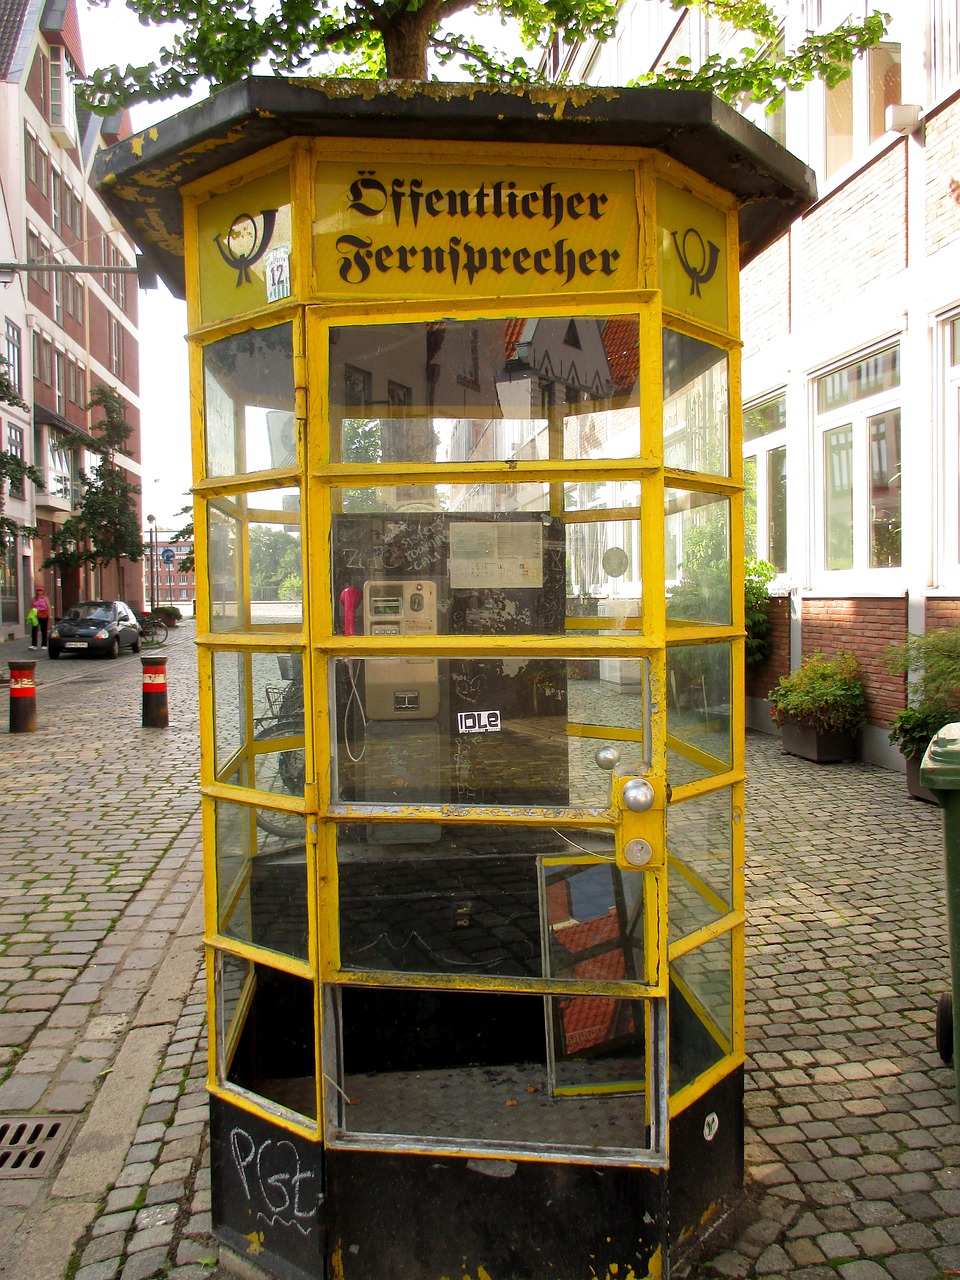 phone booth historically payphone free photo